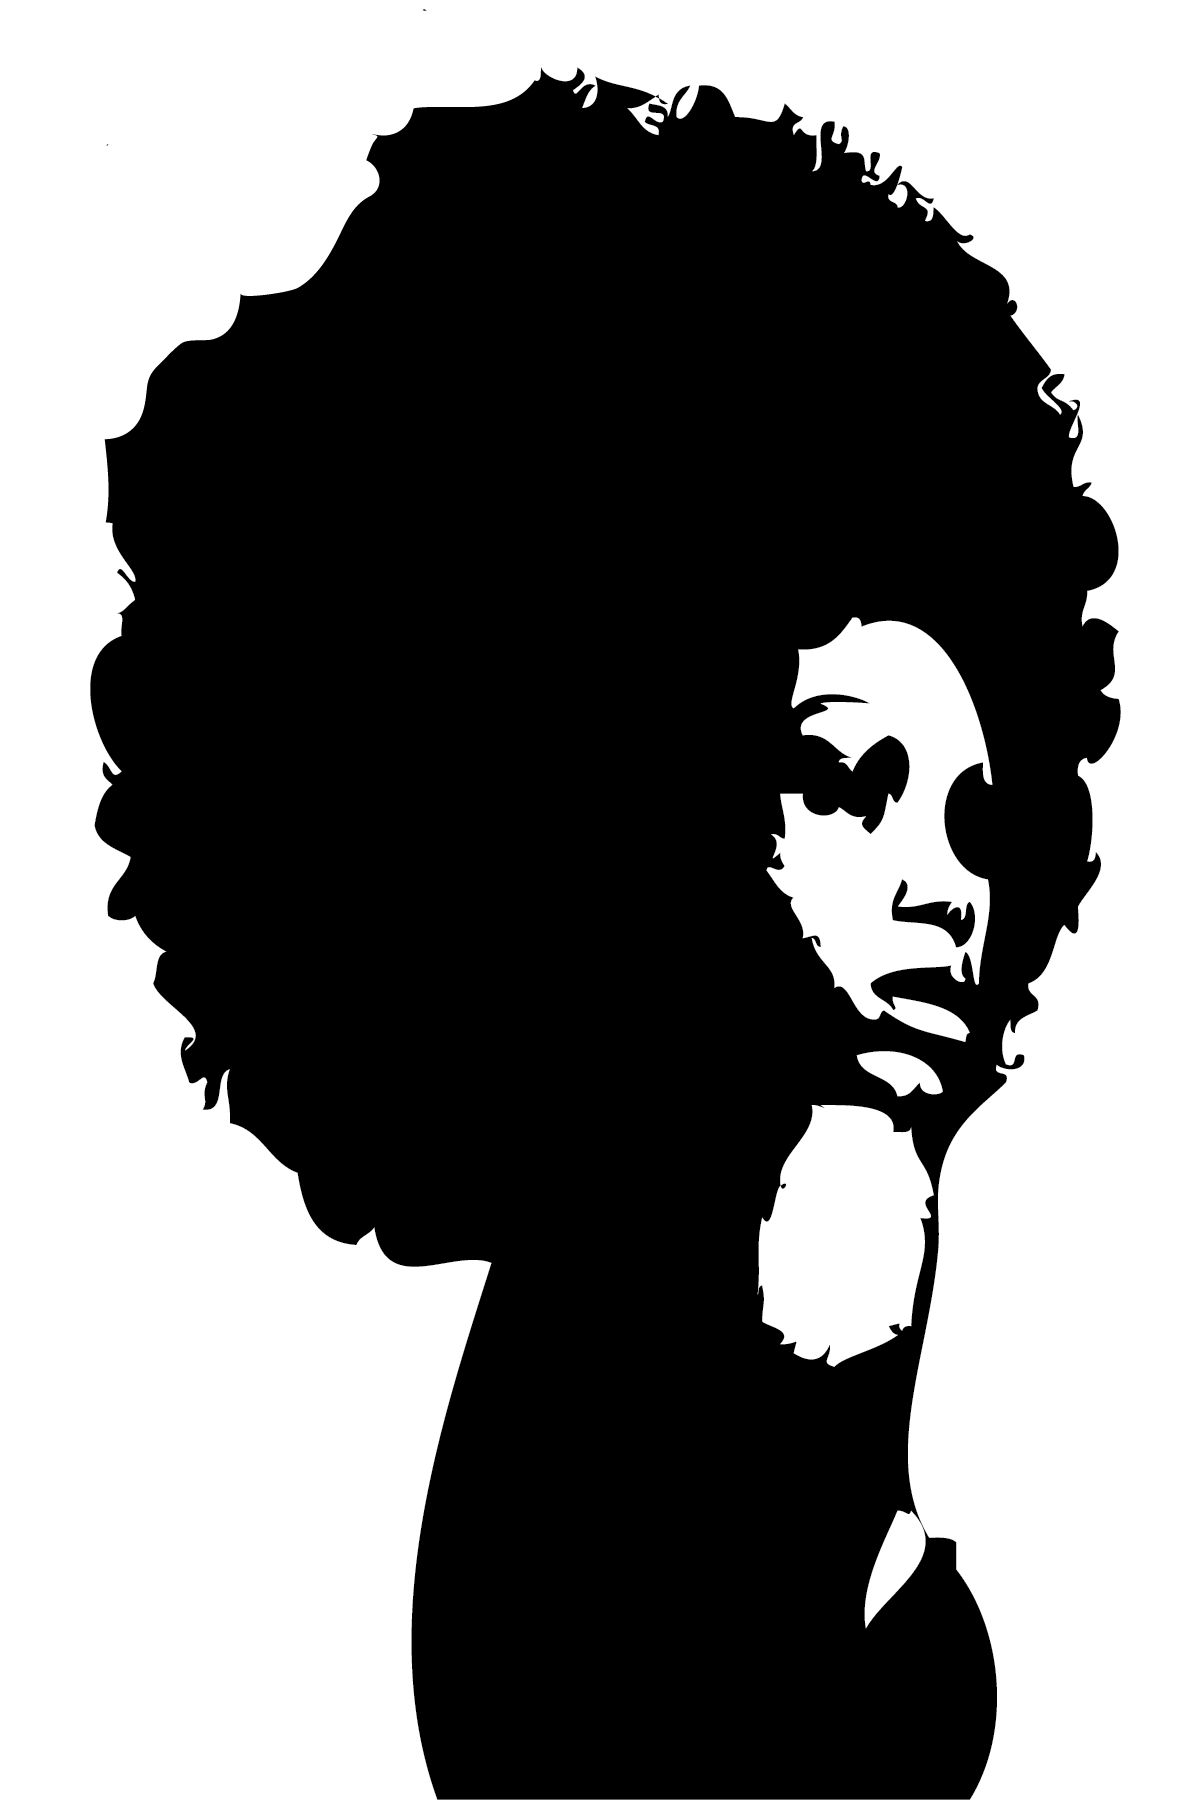 black woman with afro silhouette
